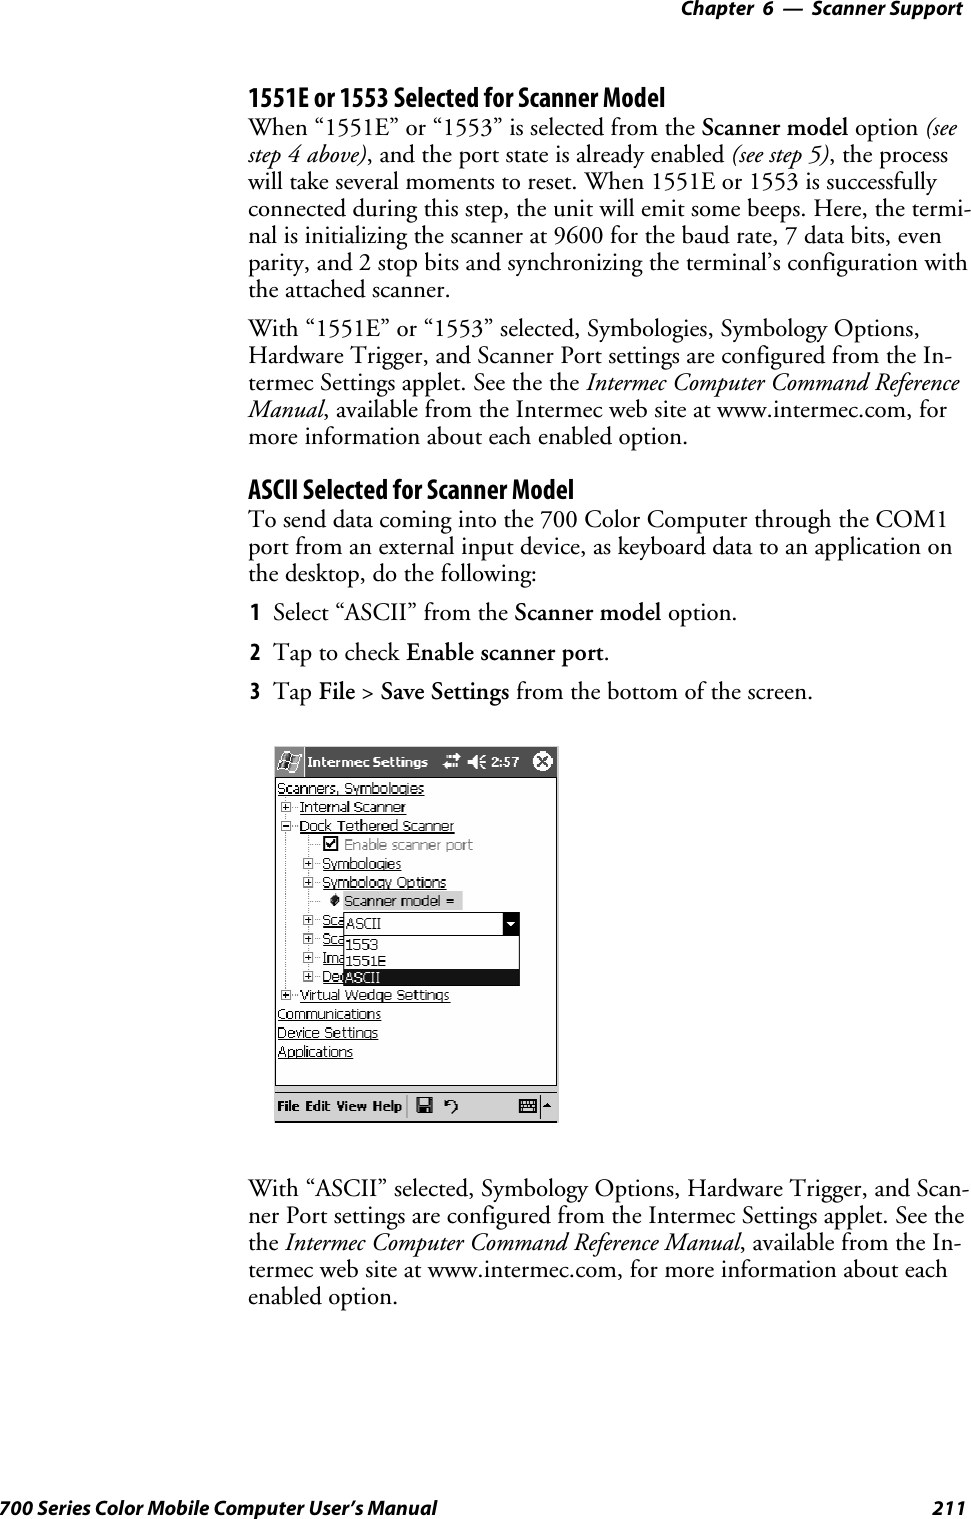 6 Scanner Support—Chapter211700 Series Color Mobile Computer User’s Manual1551E or 1553 Selected for Scanner ModelWhen “1551E” or “1553” is selected from the Scanner model option (seestep 4 above), and the port state is already enabled (see step 5),theprocesswill take several moments to reset. When 1551E or 1553 is successfullyconnected during this step, the unit will emit some beeps. Here, the termi-nal is initializing the scanner at 9600 for the baud rate, 7 data bits, evenparity, and 2 stop bits and synchronizing the terminal’s configuration withthe attached scanner.With “1551E” or “1553” selected, Symbologies, Symbology Options,Hardware Trigger, and Scanner Port settings are configured from the In-termec Settings applet. See the the Intermec Computer Command ReferenceManual, available from the Intermec web site at www.intermec.com, formore information about each enabled option.ASCII Selected for Scanner ModelTo send data coming into the 700 Color Computer through the COM1port from an external input device, as keyboard data to an application onthe desktop, do the following:1Select “ASCII” from the Scanner model option.2Tap to check Enable scanner port.3Tap File &gt;Save Settings from the bottom of the screen.With “ASCII” selected, Symbology Options, Hardware Trigger, and Scan-ner Port settings are configured from the Intermec Settings applet. See thethe Intermec Computer Command Reference Manual,availablefromtheIn-termec web site at www.intermec.com, for more information about eachenabled option.